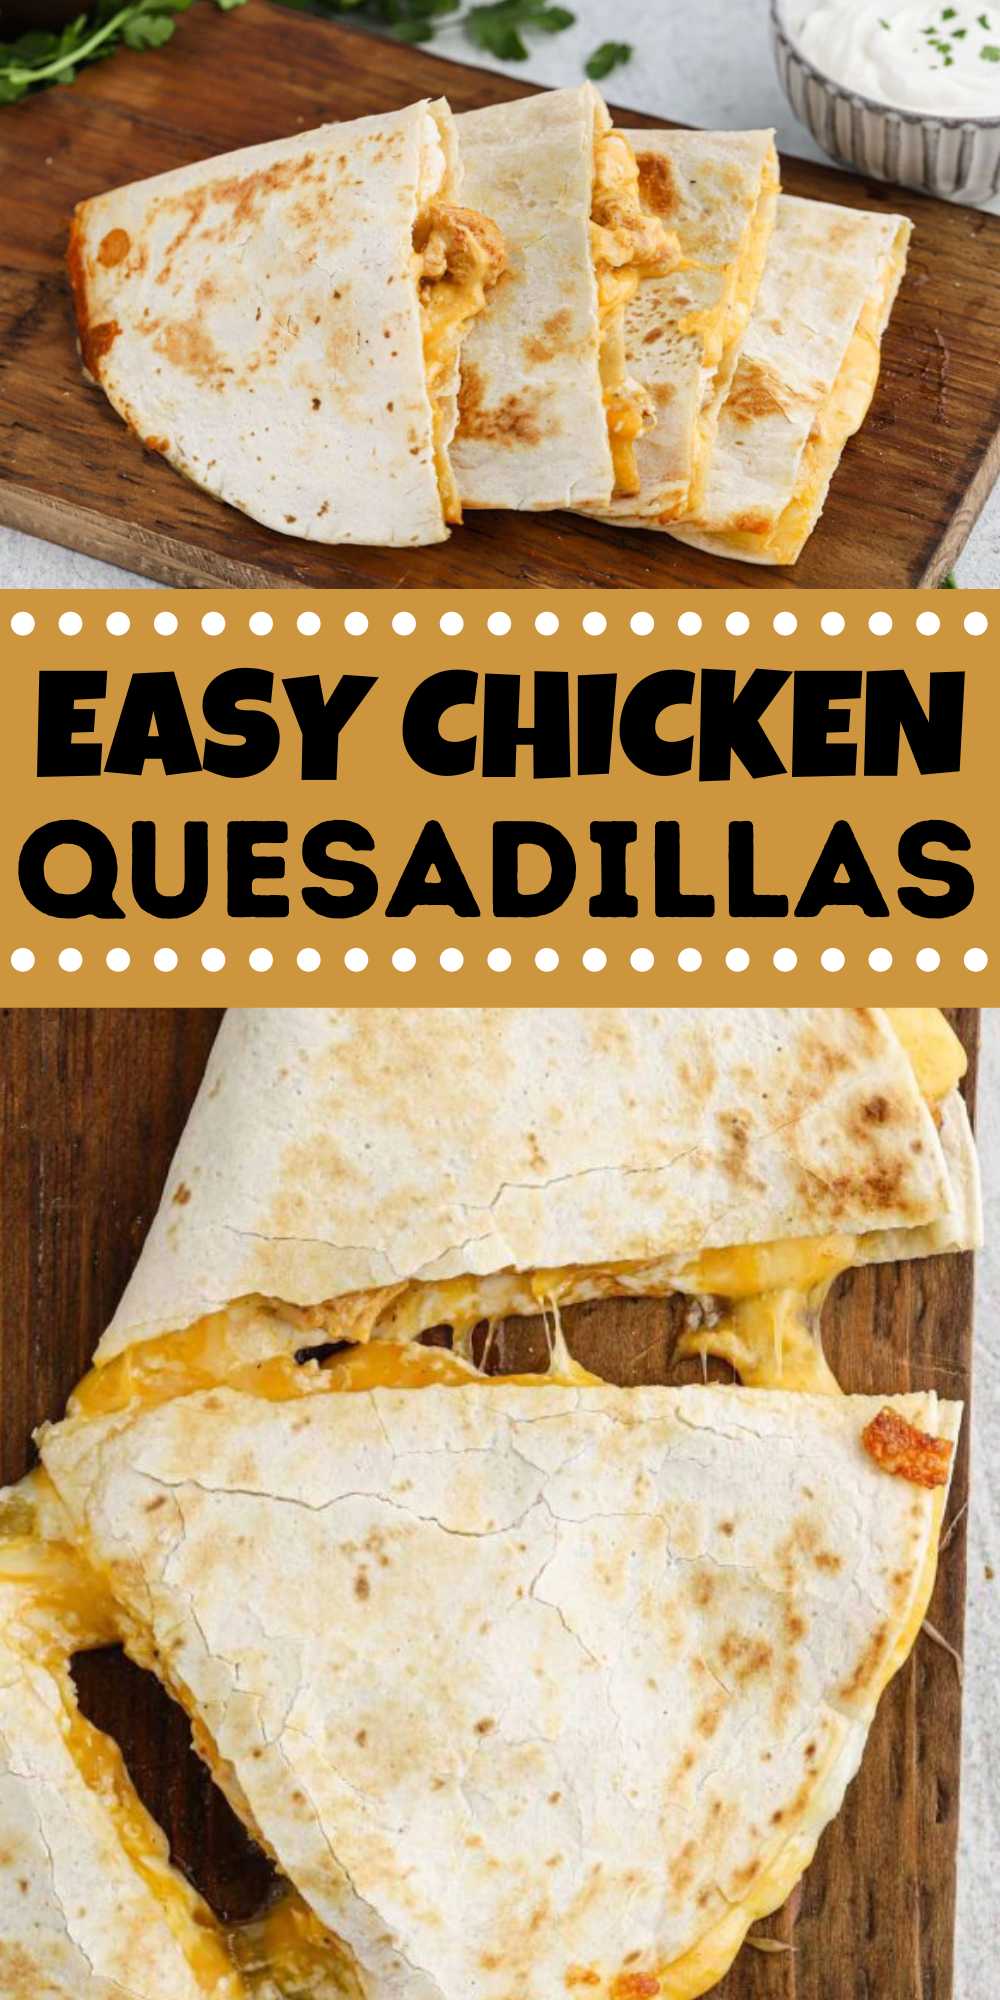 Easy Chicken Quesadilla is a simple quick dinner idea. Chicken and cheese is cooked between two tortilla to make a delicious quesadilla. You only need 5 ingredients to make this recipe. Diced up chicken is cooked with taco seasoning and then layered on a tortilla with cheese. The quesadilla is then cooked to perfection on a skillet to get a crispy texture. #eatingonadime #chickenquesadilla #quesadillarecipes